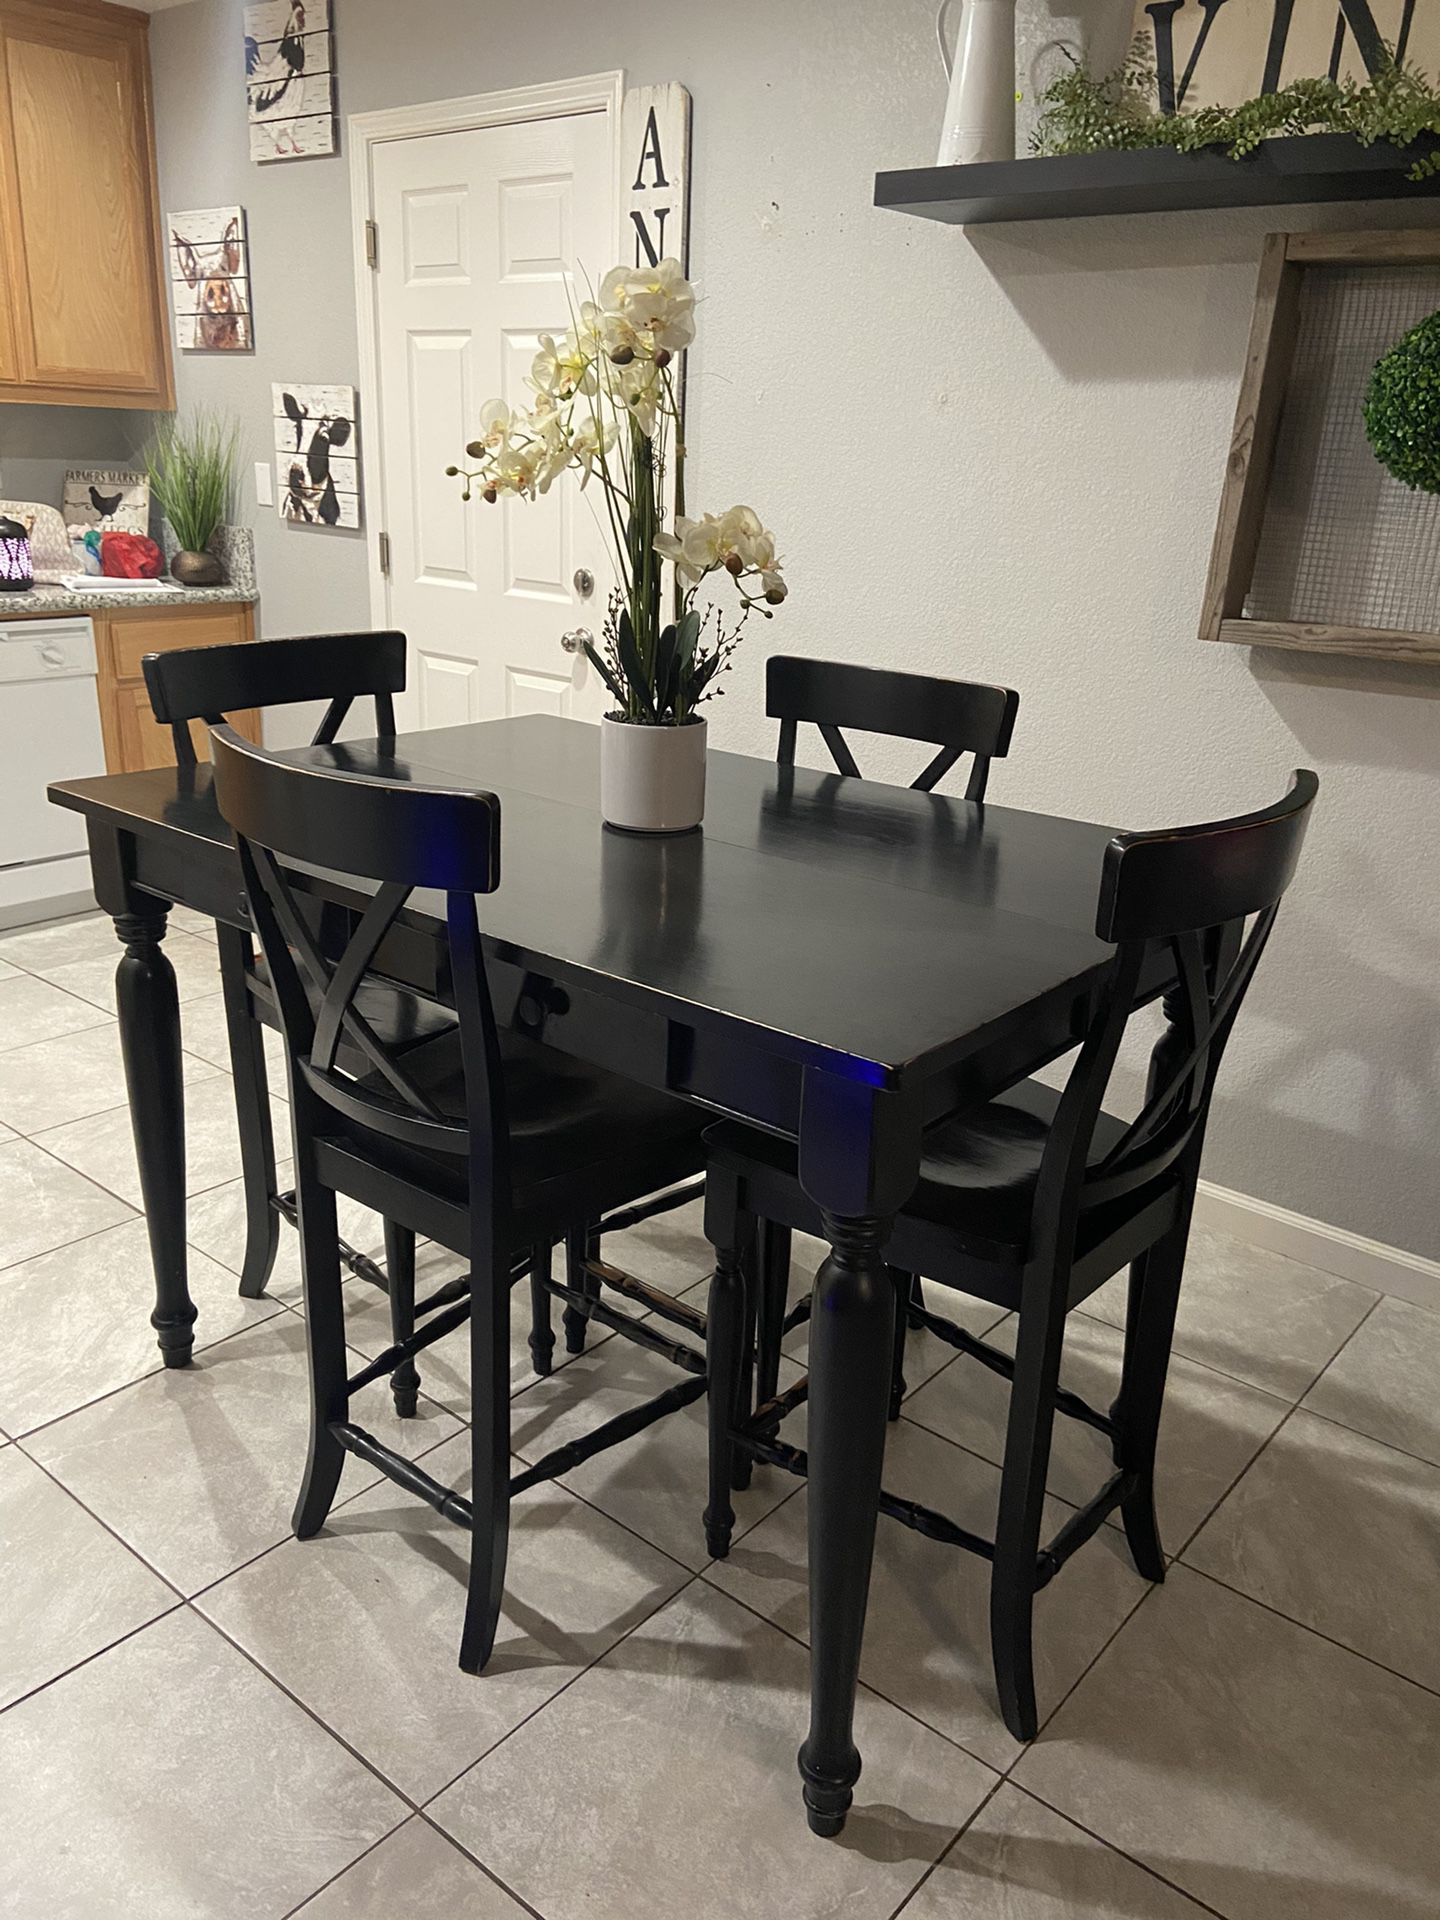 *MOVING* pub style distressed table w 4 chairs